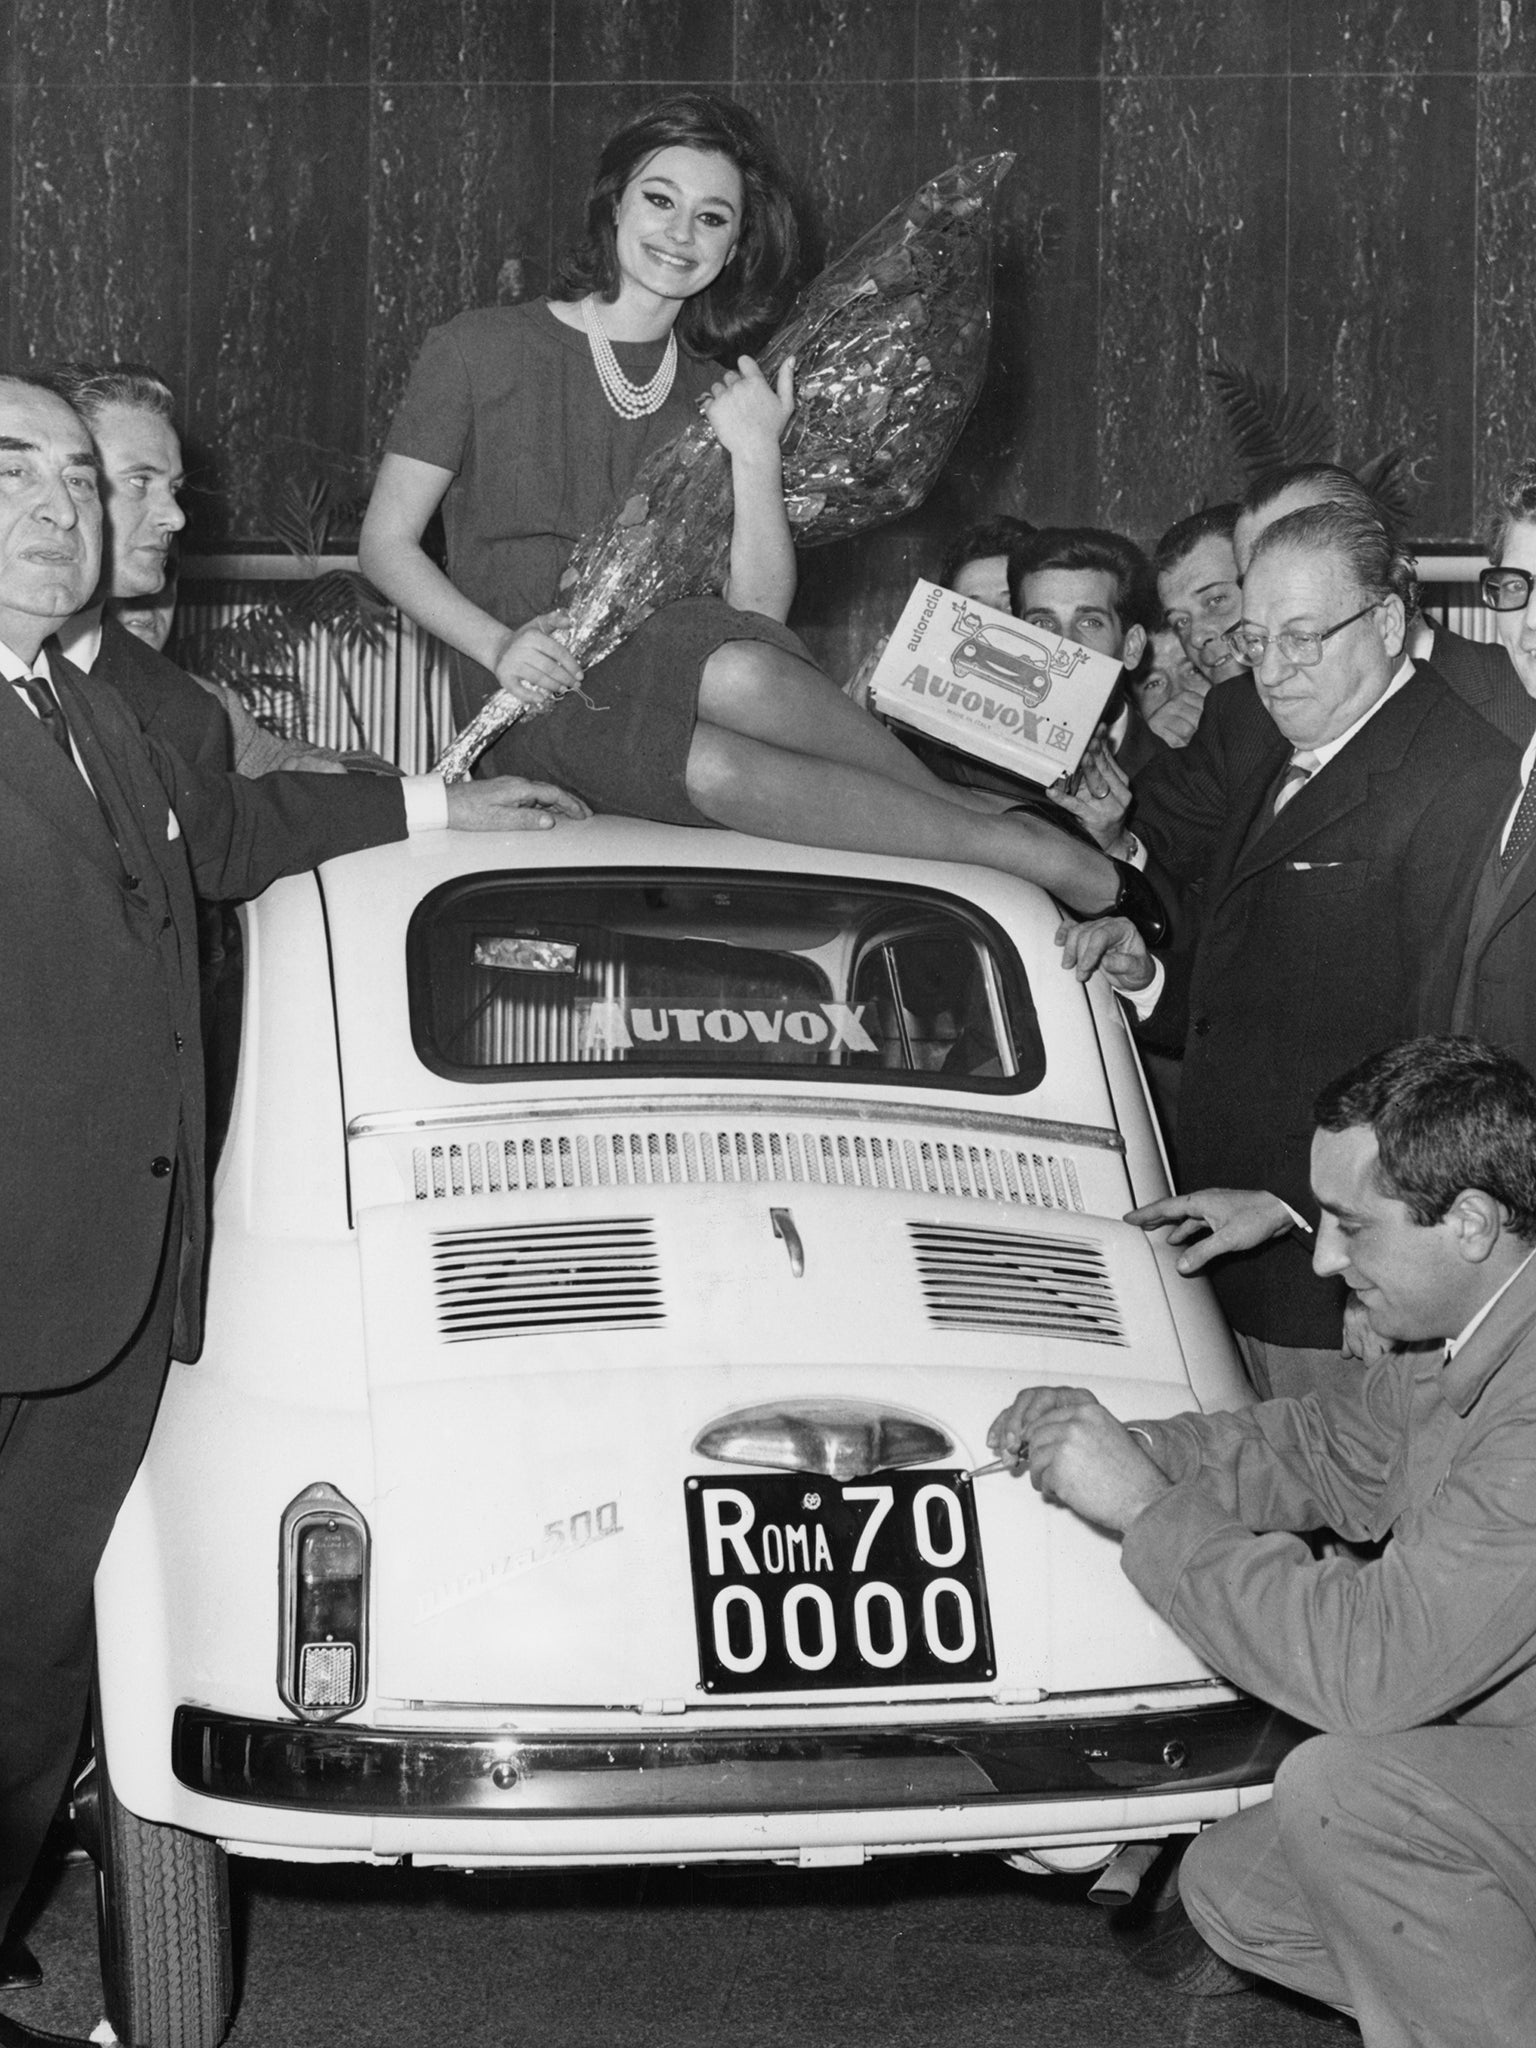 Carra presents the 700,000th Roman number plate in 1964